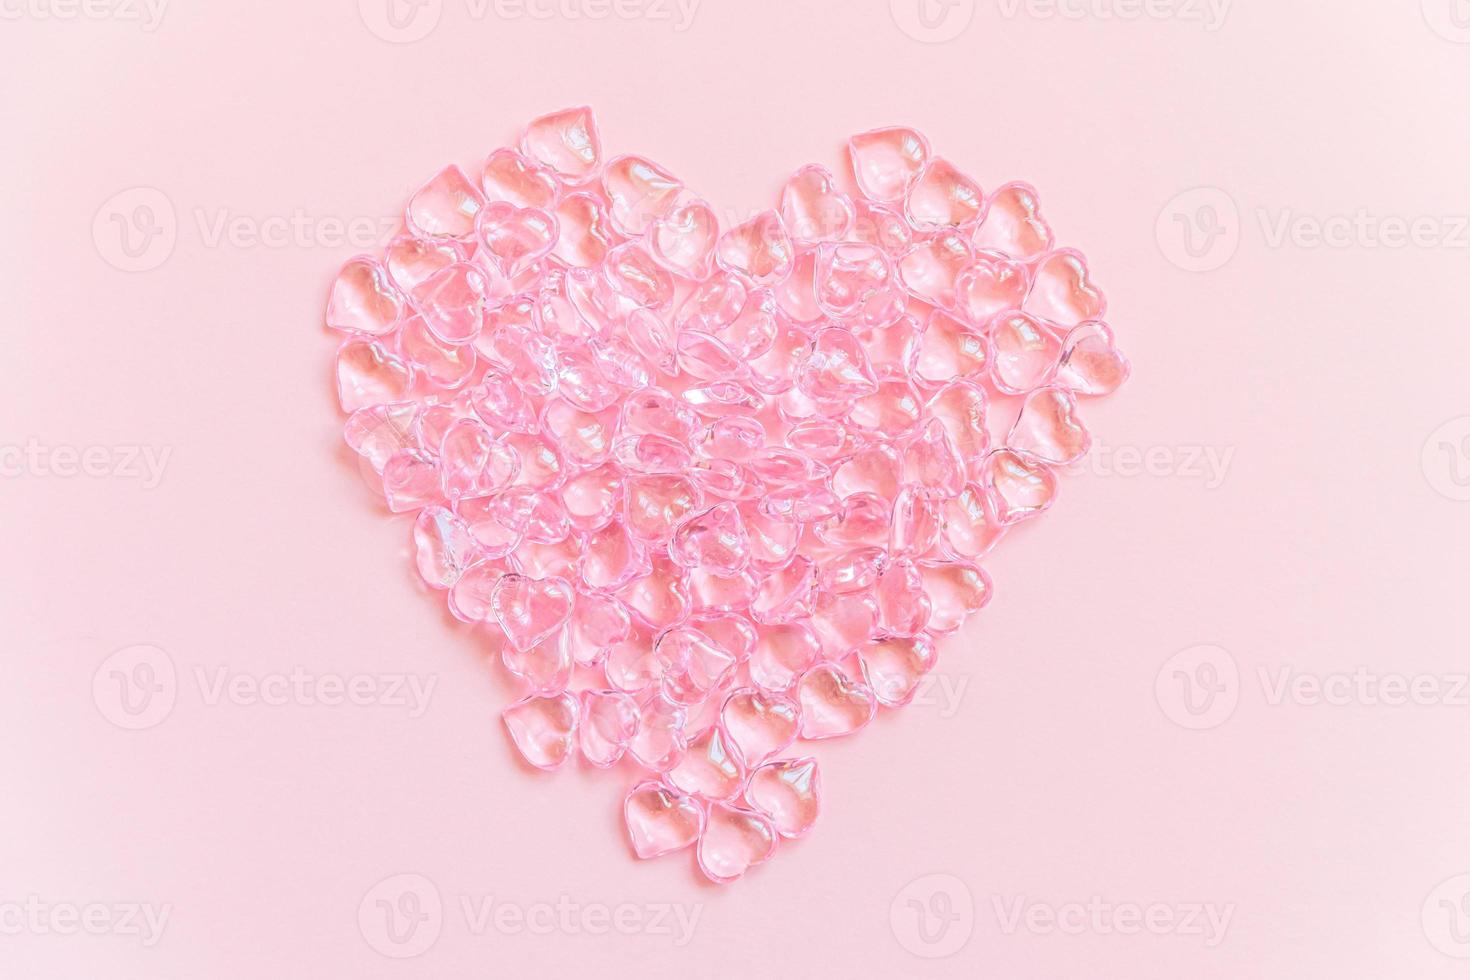 St. Valentine's Day concept. Heart shaped objects many pink hearts isolated on pink pastel background. Postcard banner on valentines day. Love date lovesick wedding romance symbol. Top view, flat lay photo